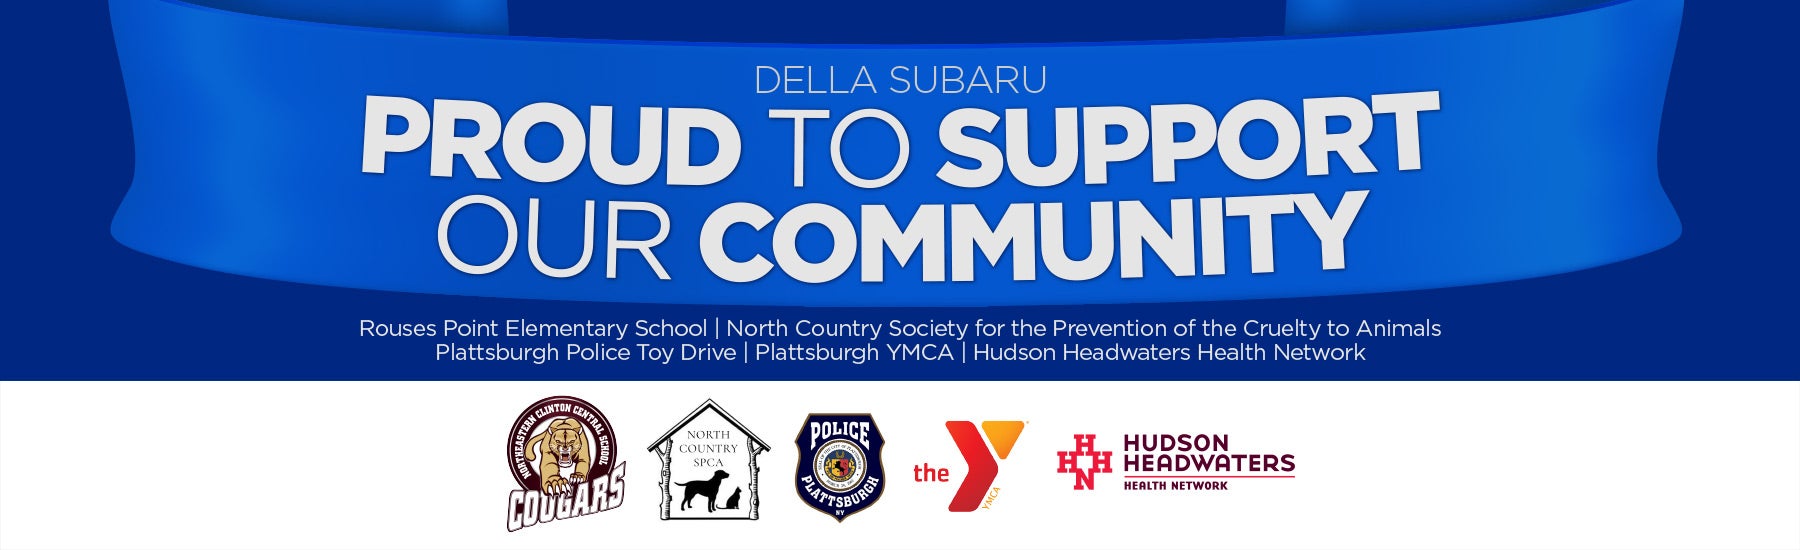 Della Subaru is Proud to Support our Community